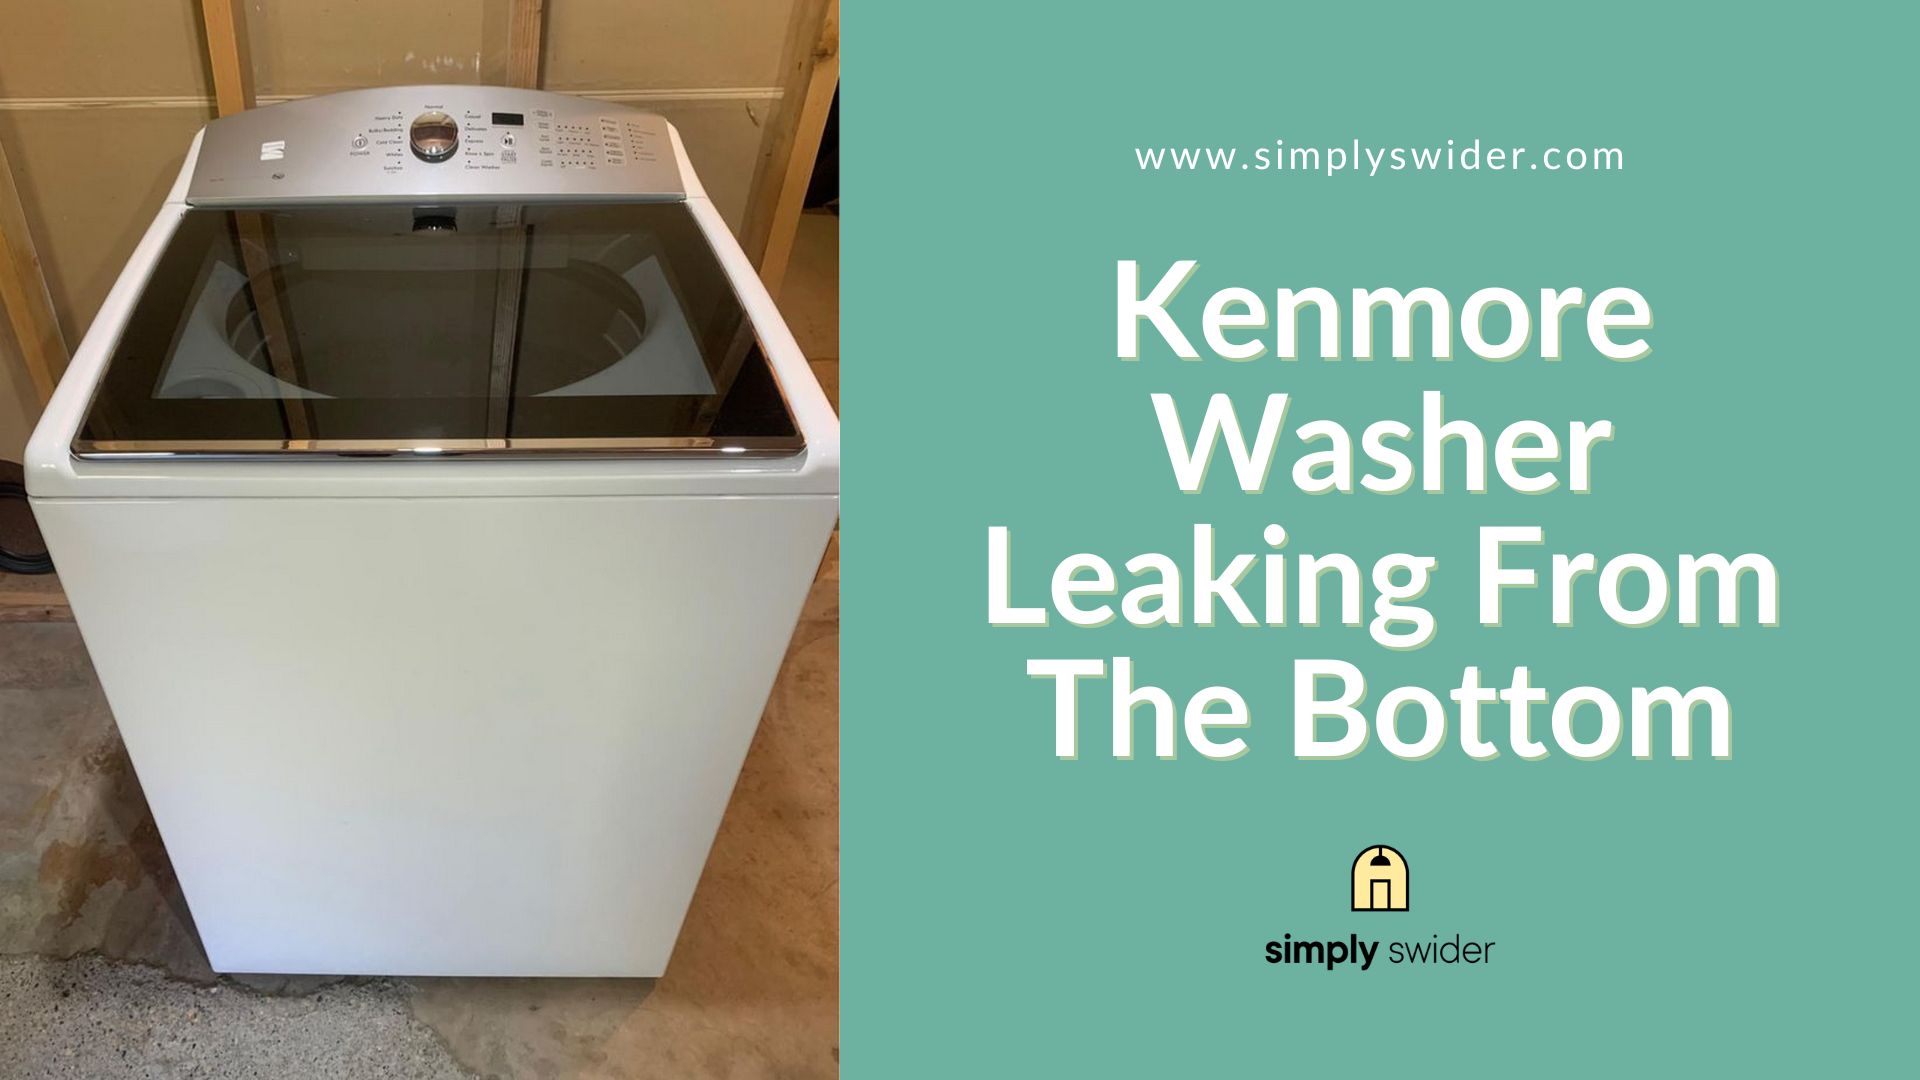 Kenmore Washer Leaking From The Bottom